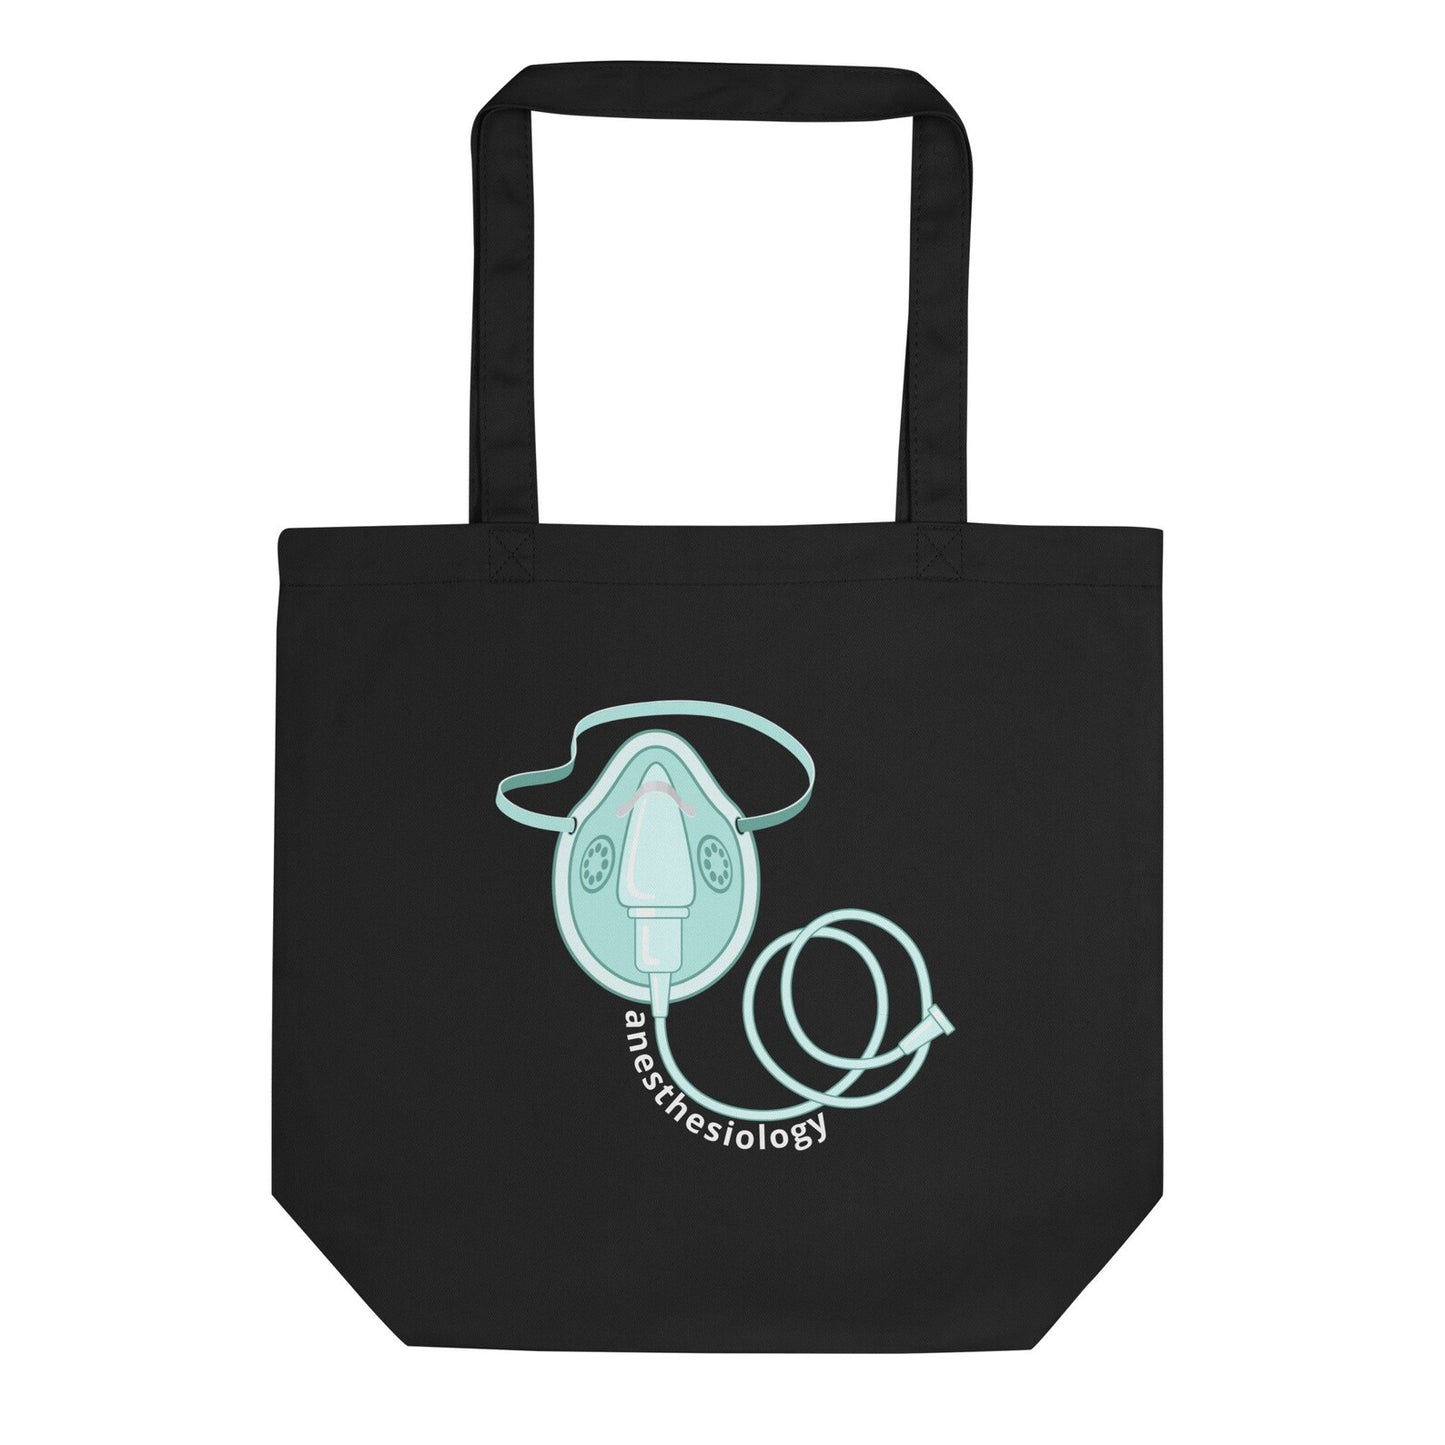 Anesthesiology Eco Tote Bag